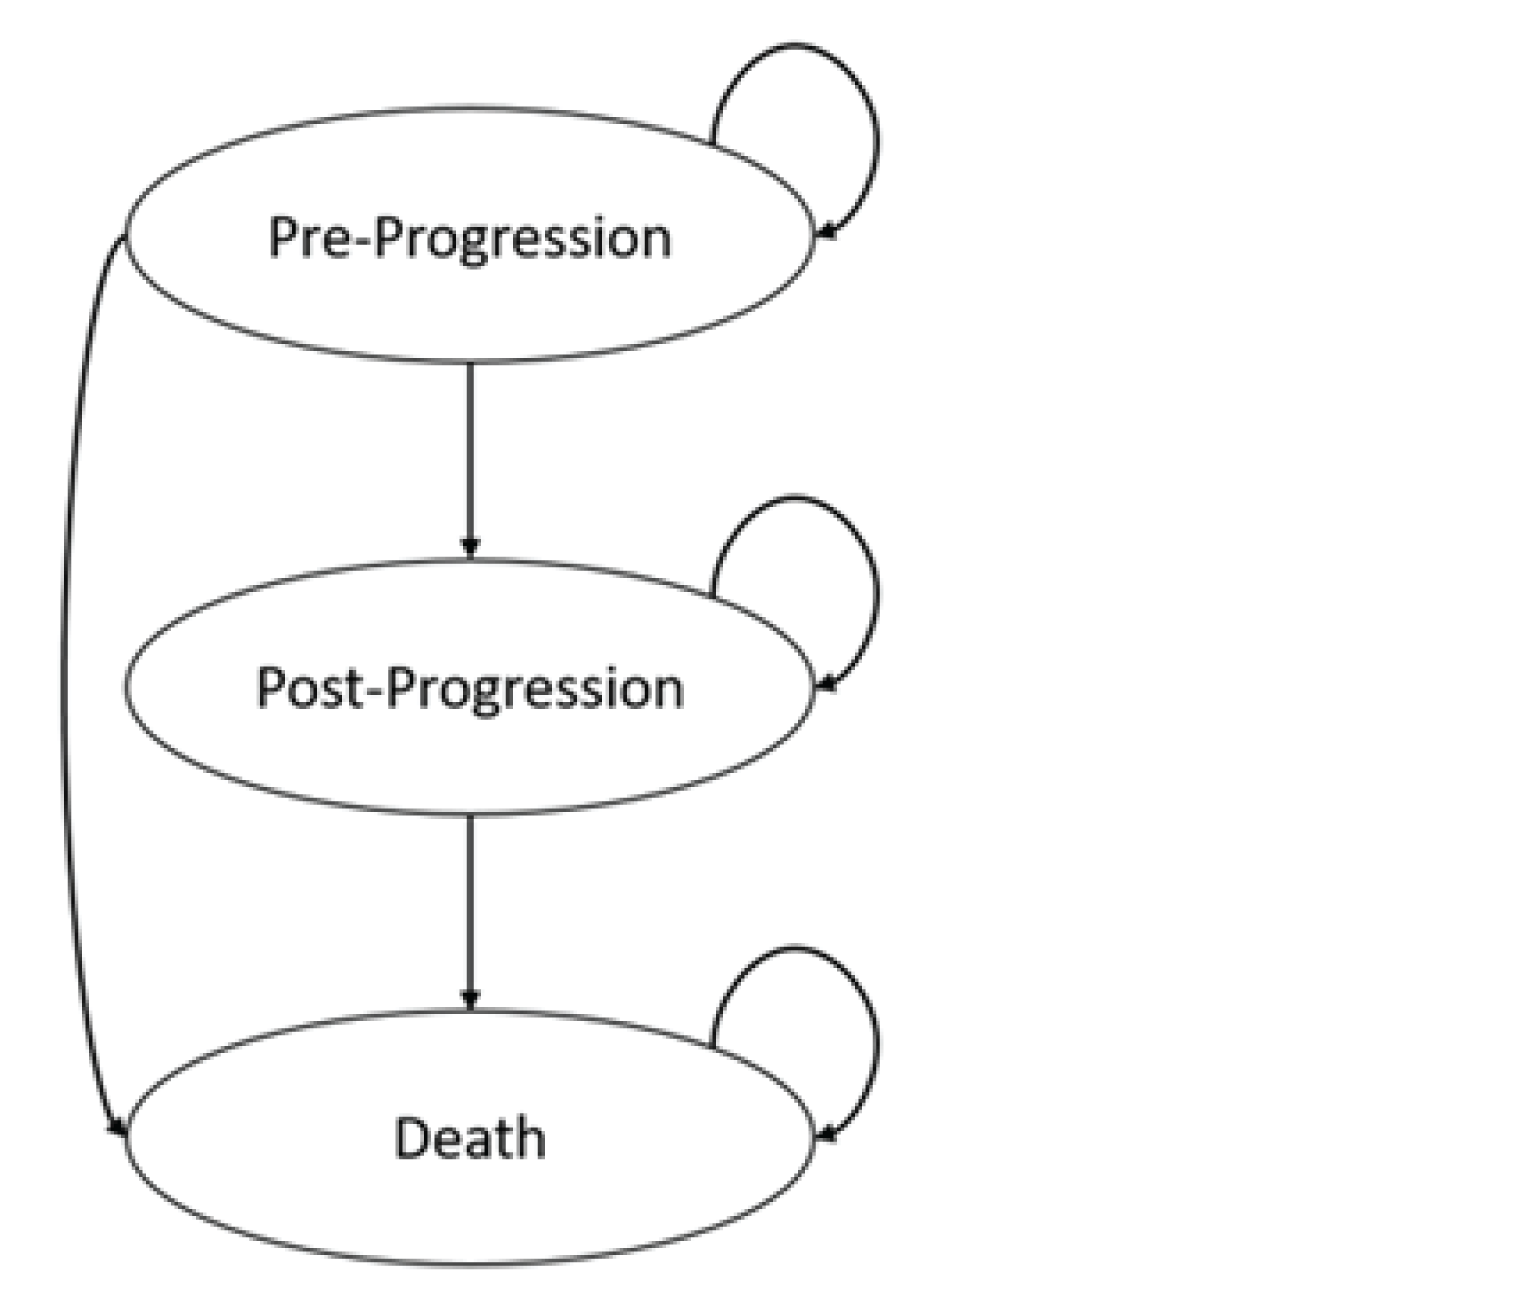 Model structure diagram, showing the three health states of pre-progression, post-progression, and death. Patients can stay in the pre-progression health state or move to post-progression. Patients can stay in the post-progression health state. Death is the absorbing health state.